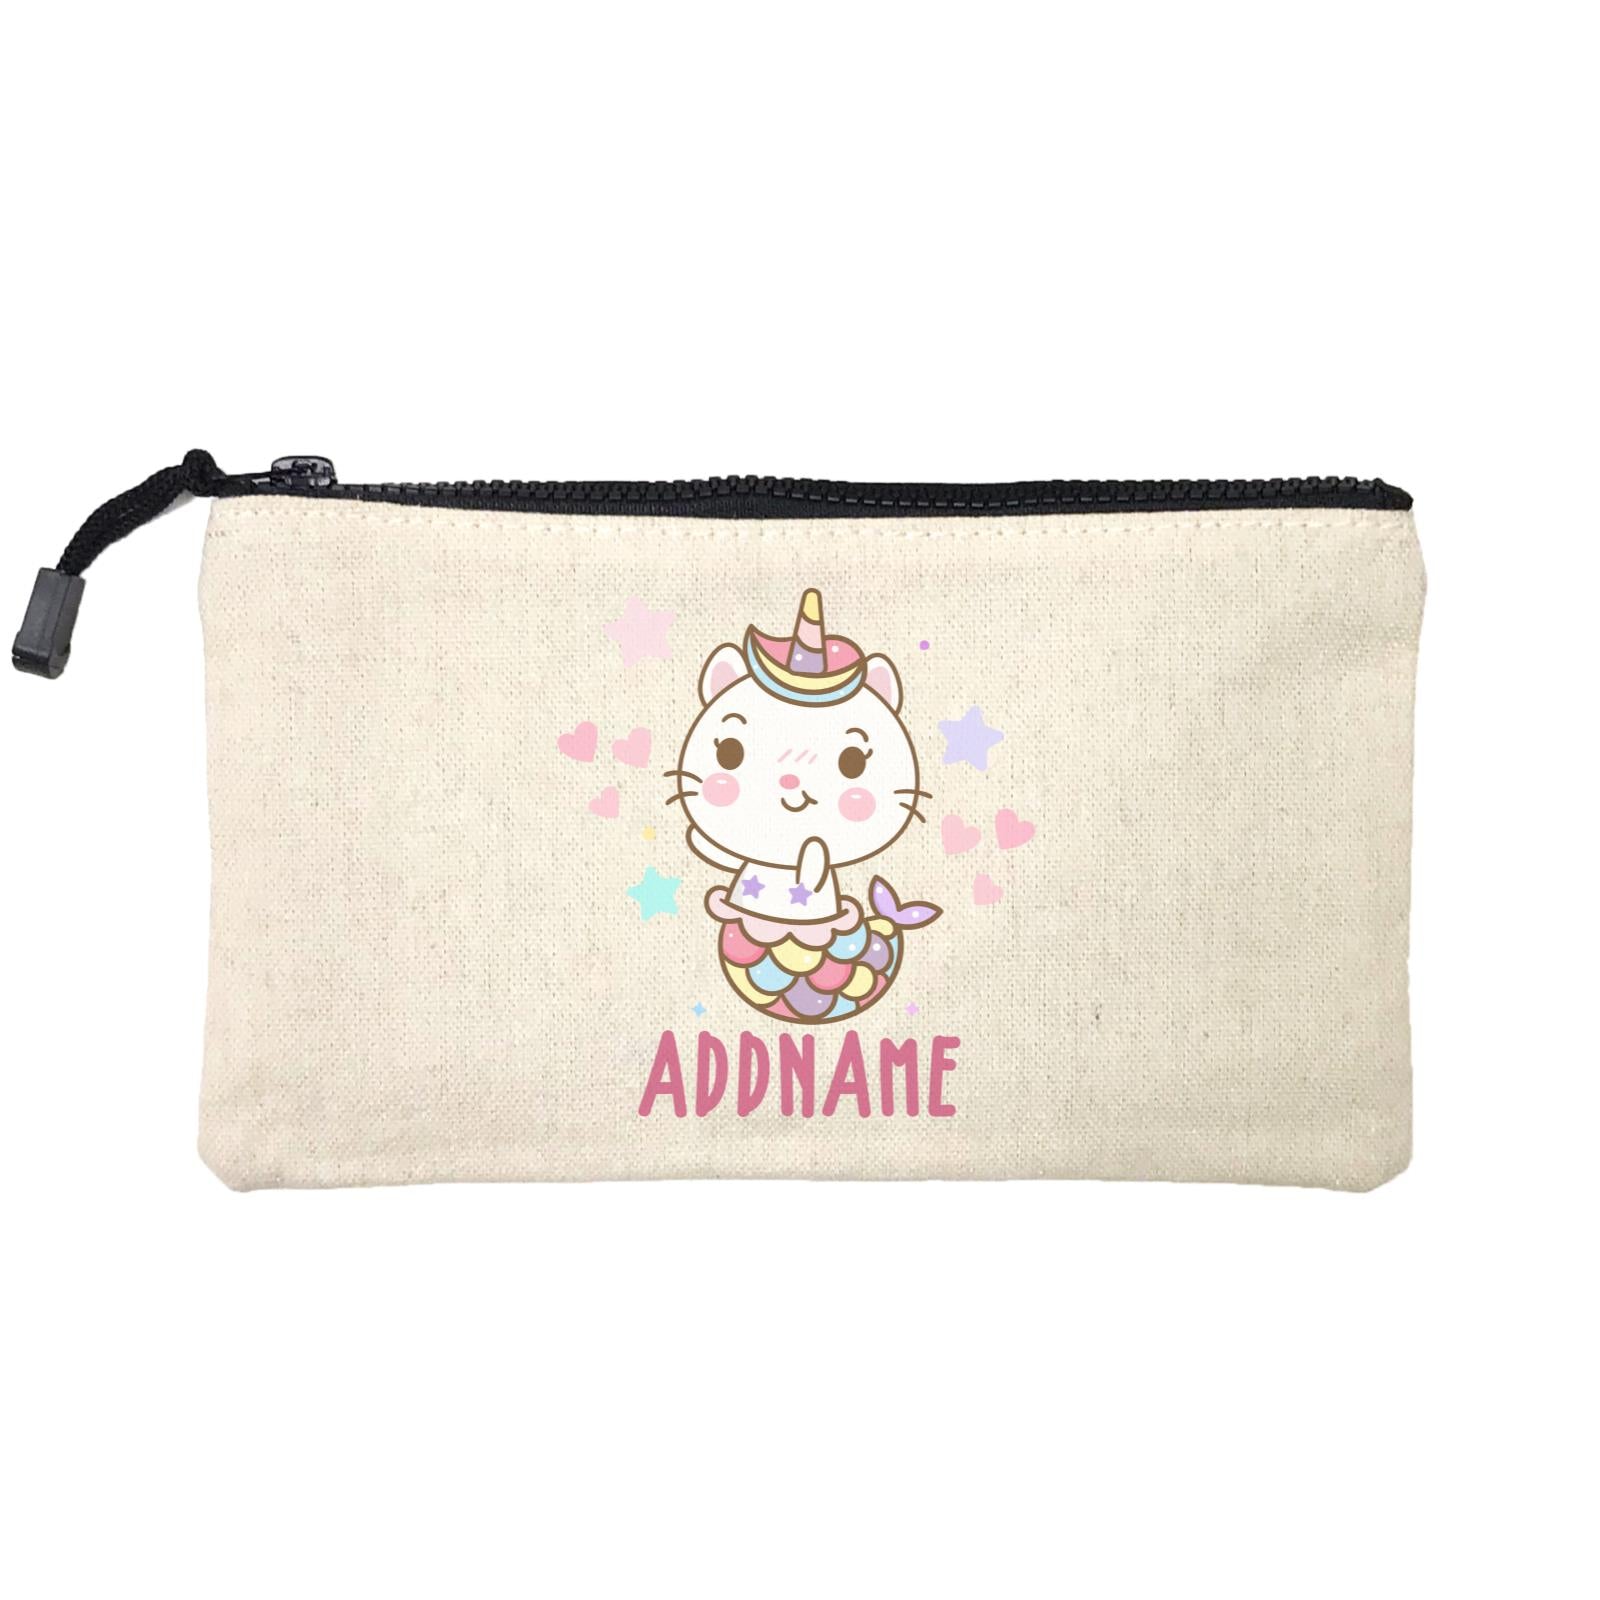 Unicorn And Princess Series Cute Shy Cat Mermaid Addname Mini Accessories Stationery Pouch